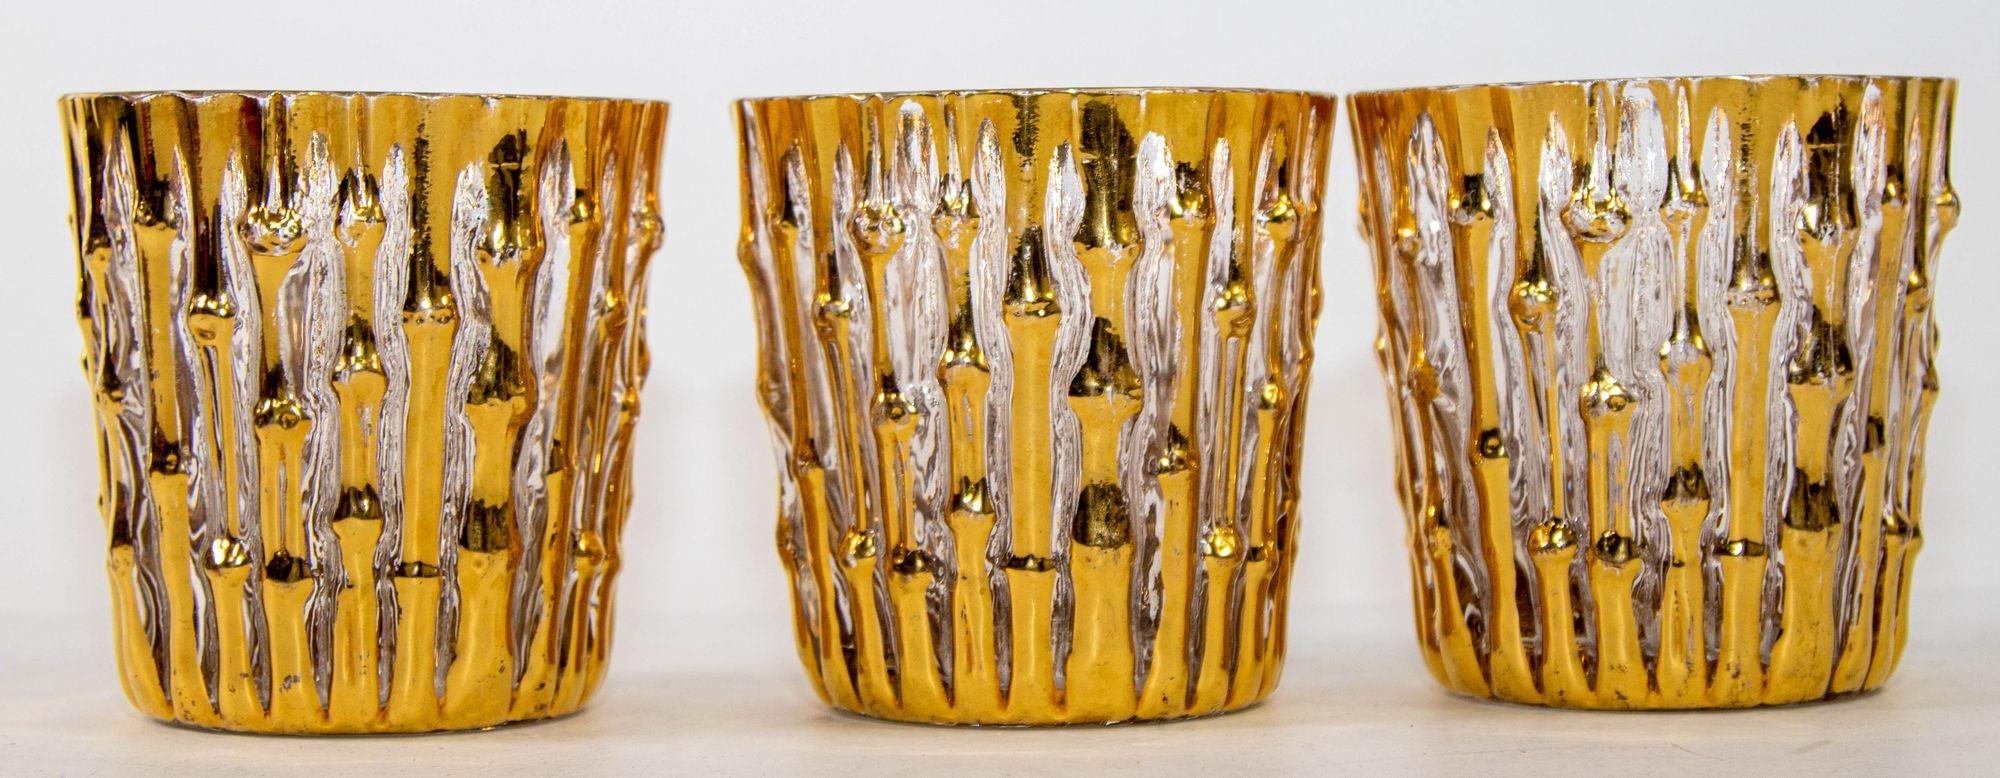 1960s Hand Painted 22-Karat Bamboo Rocks Glasses, Set of 3 Old Fashioned Barware For Sale 4